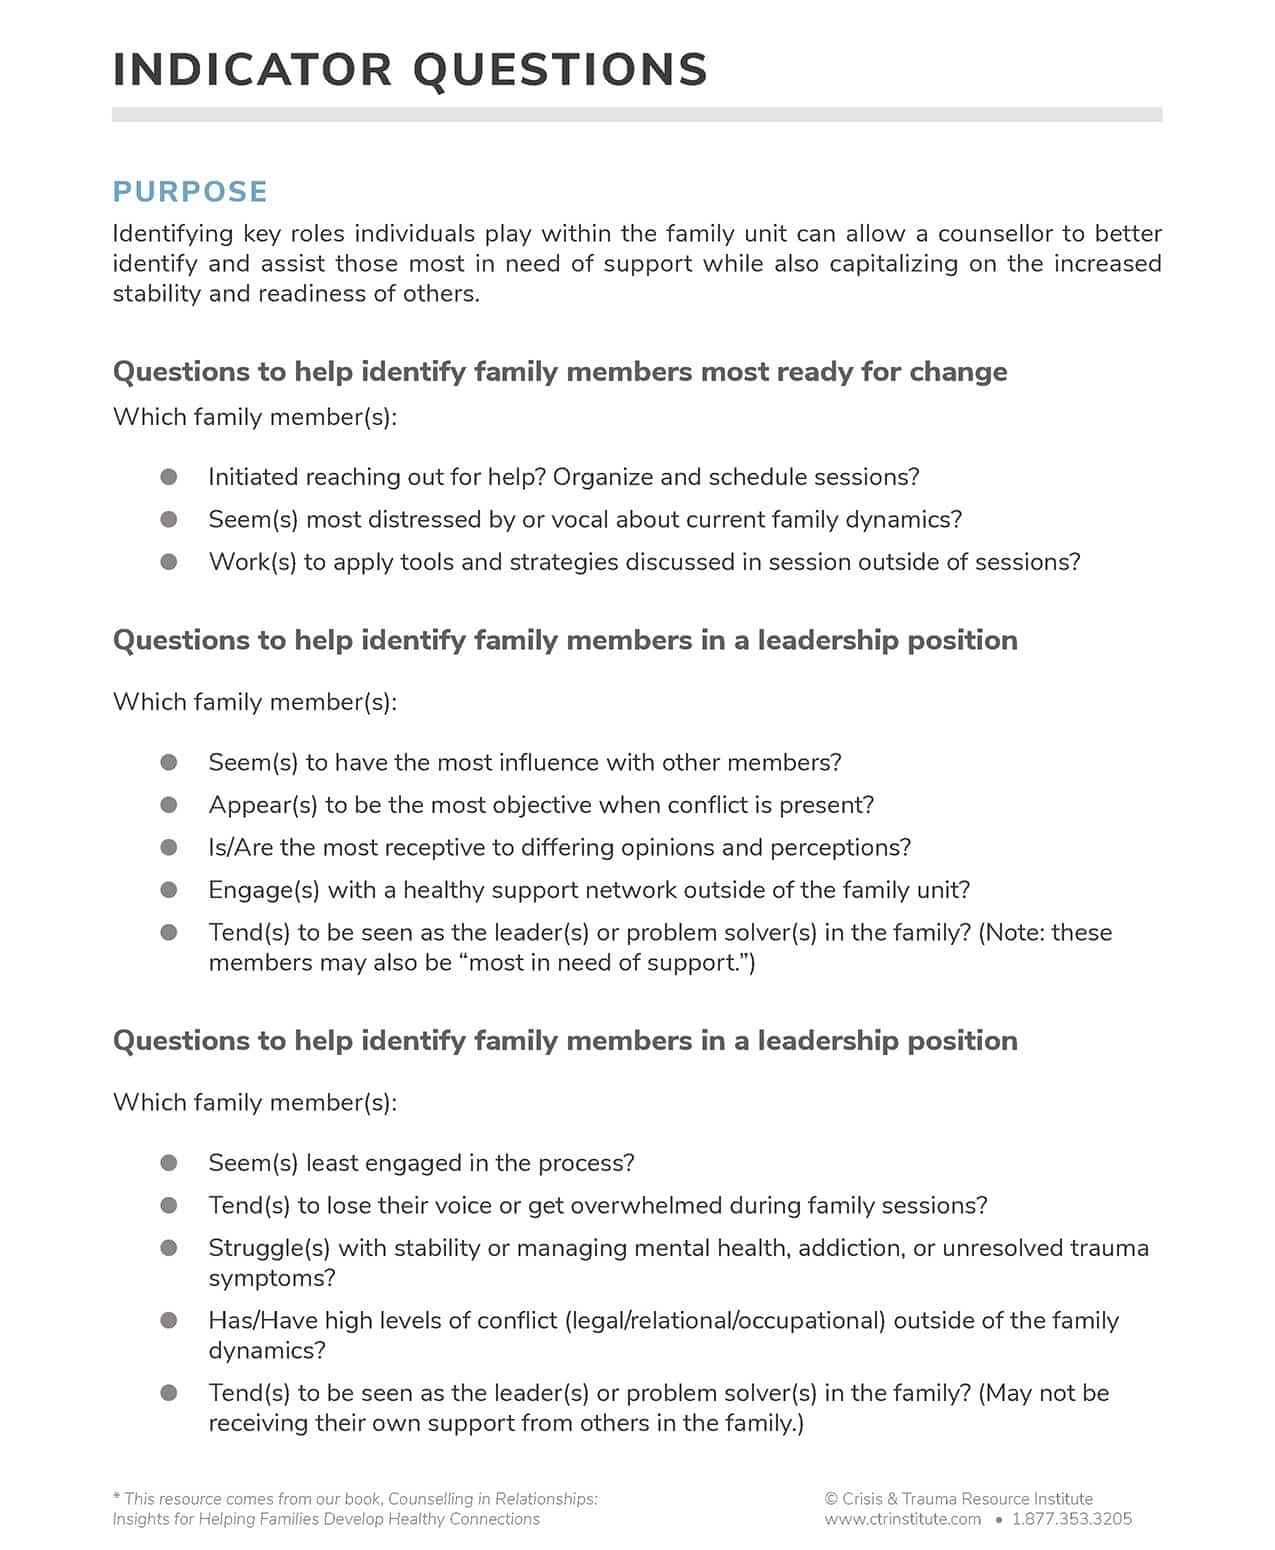 Free Printable Handout Image of Indicator Questions